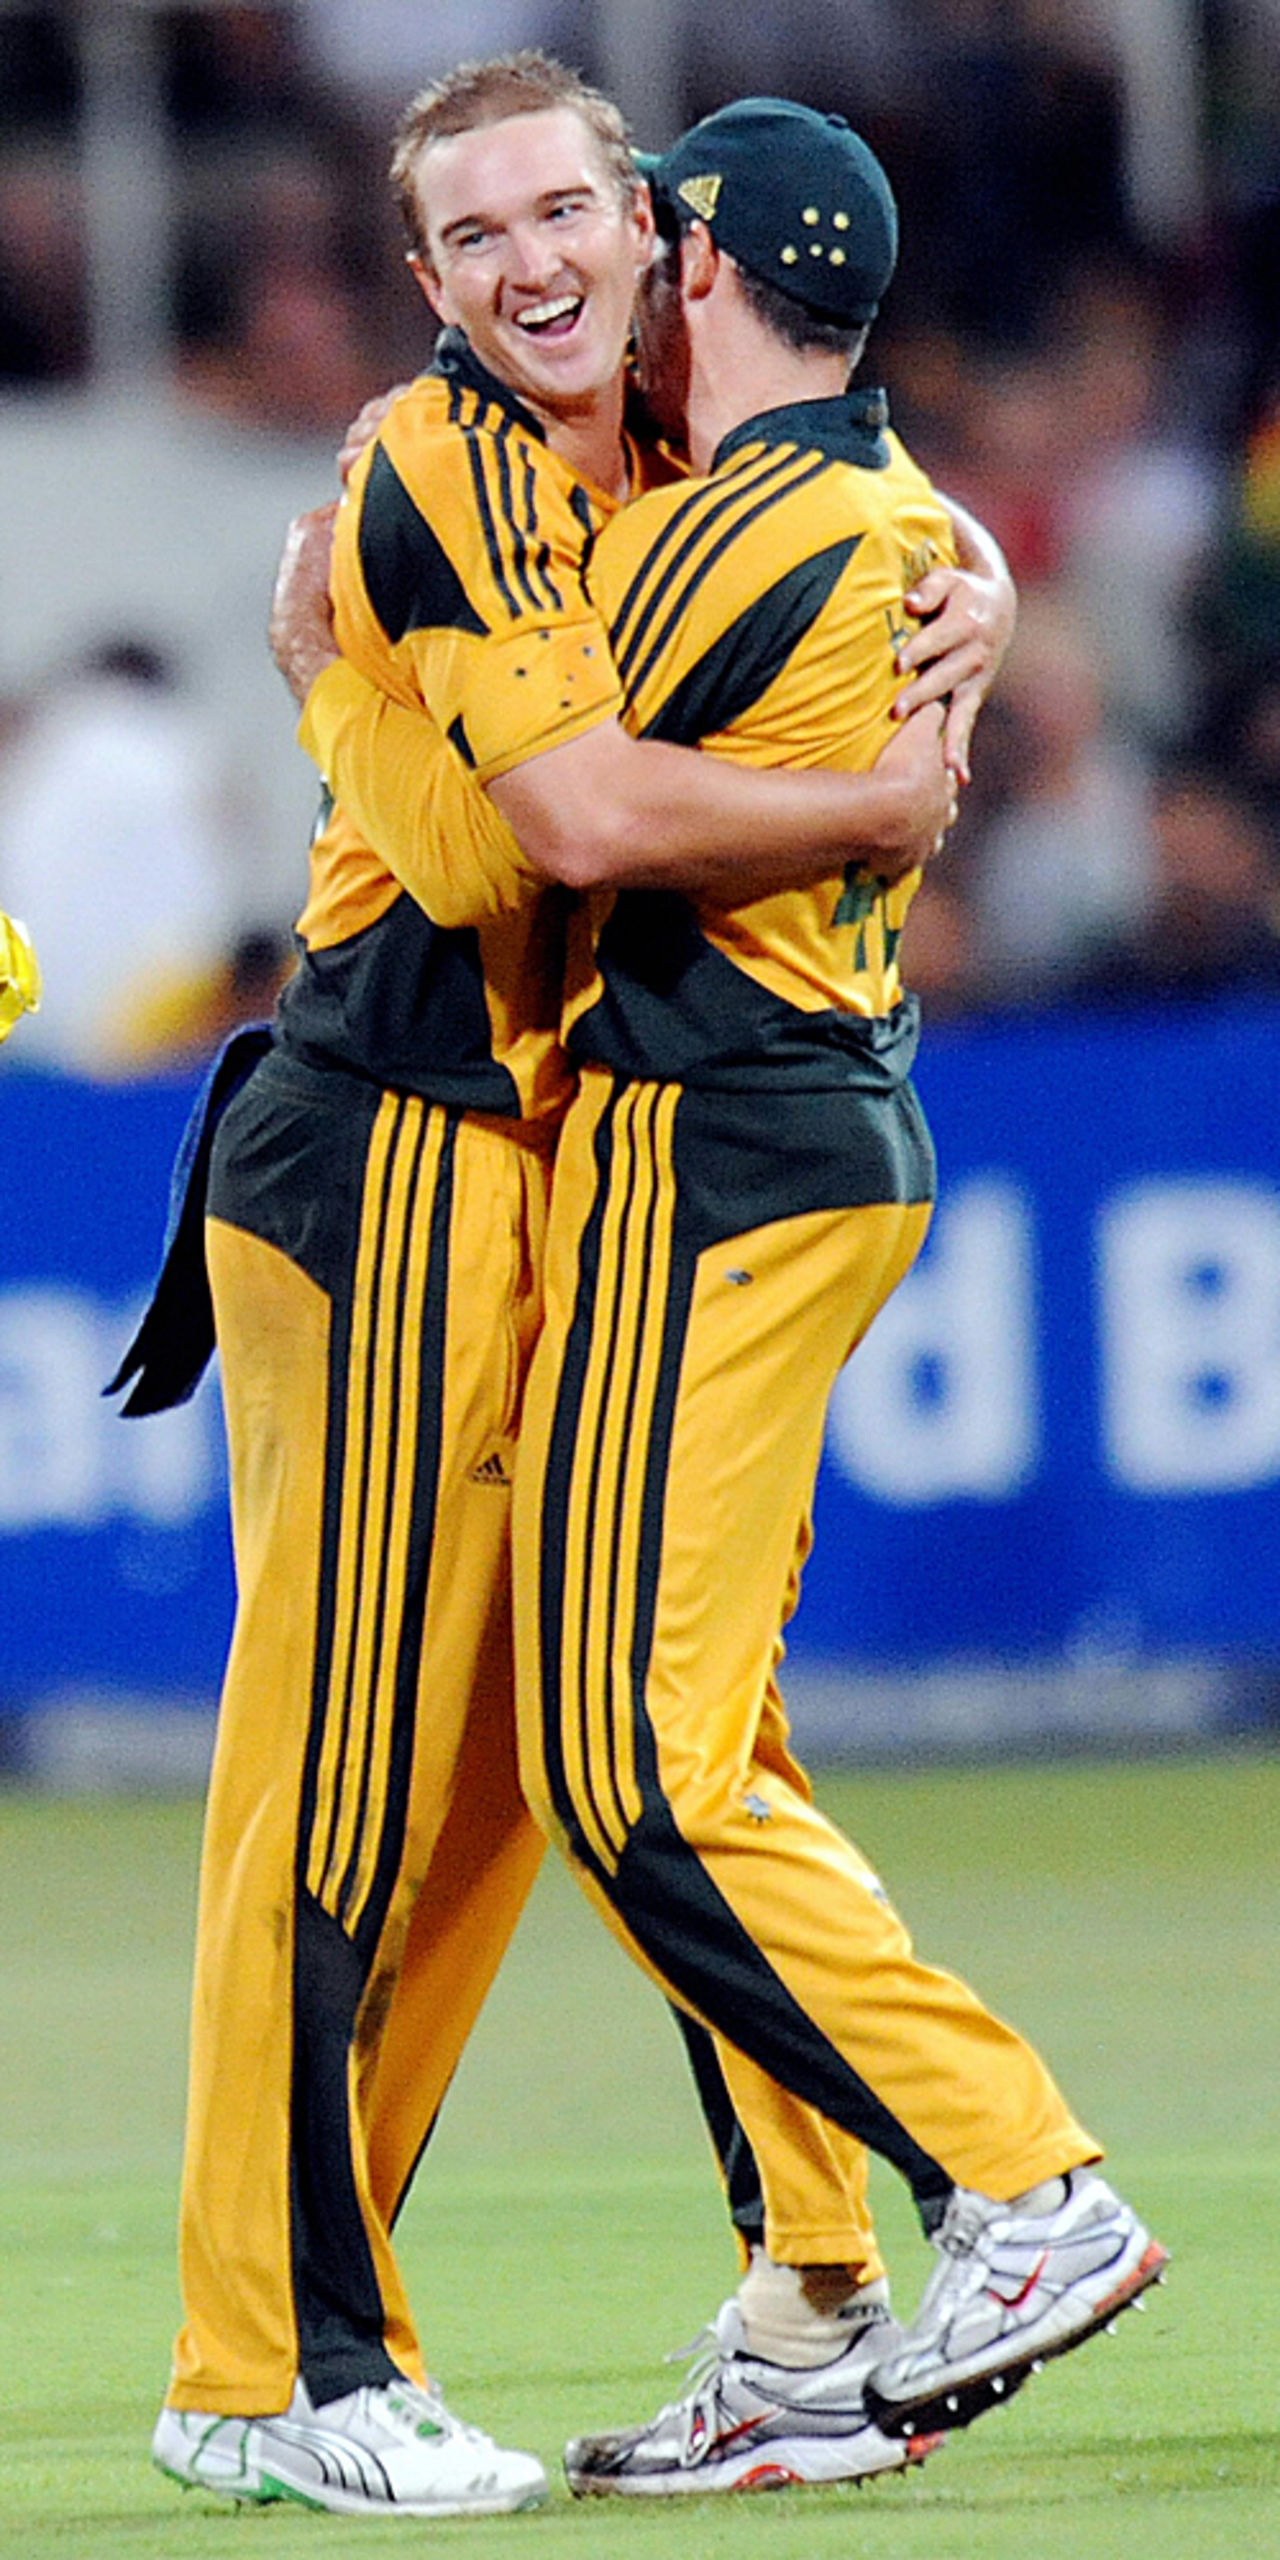 Nathan Hauritz gets the congratulations for picking up yet another wicket, South Africa v Australia, 1st ODI, Durban, April 3, 2009